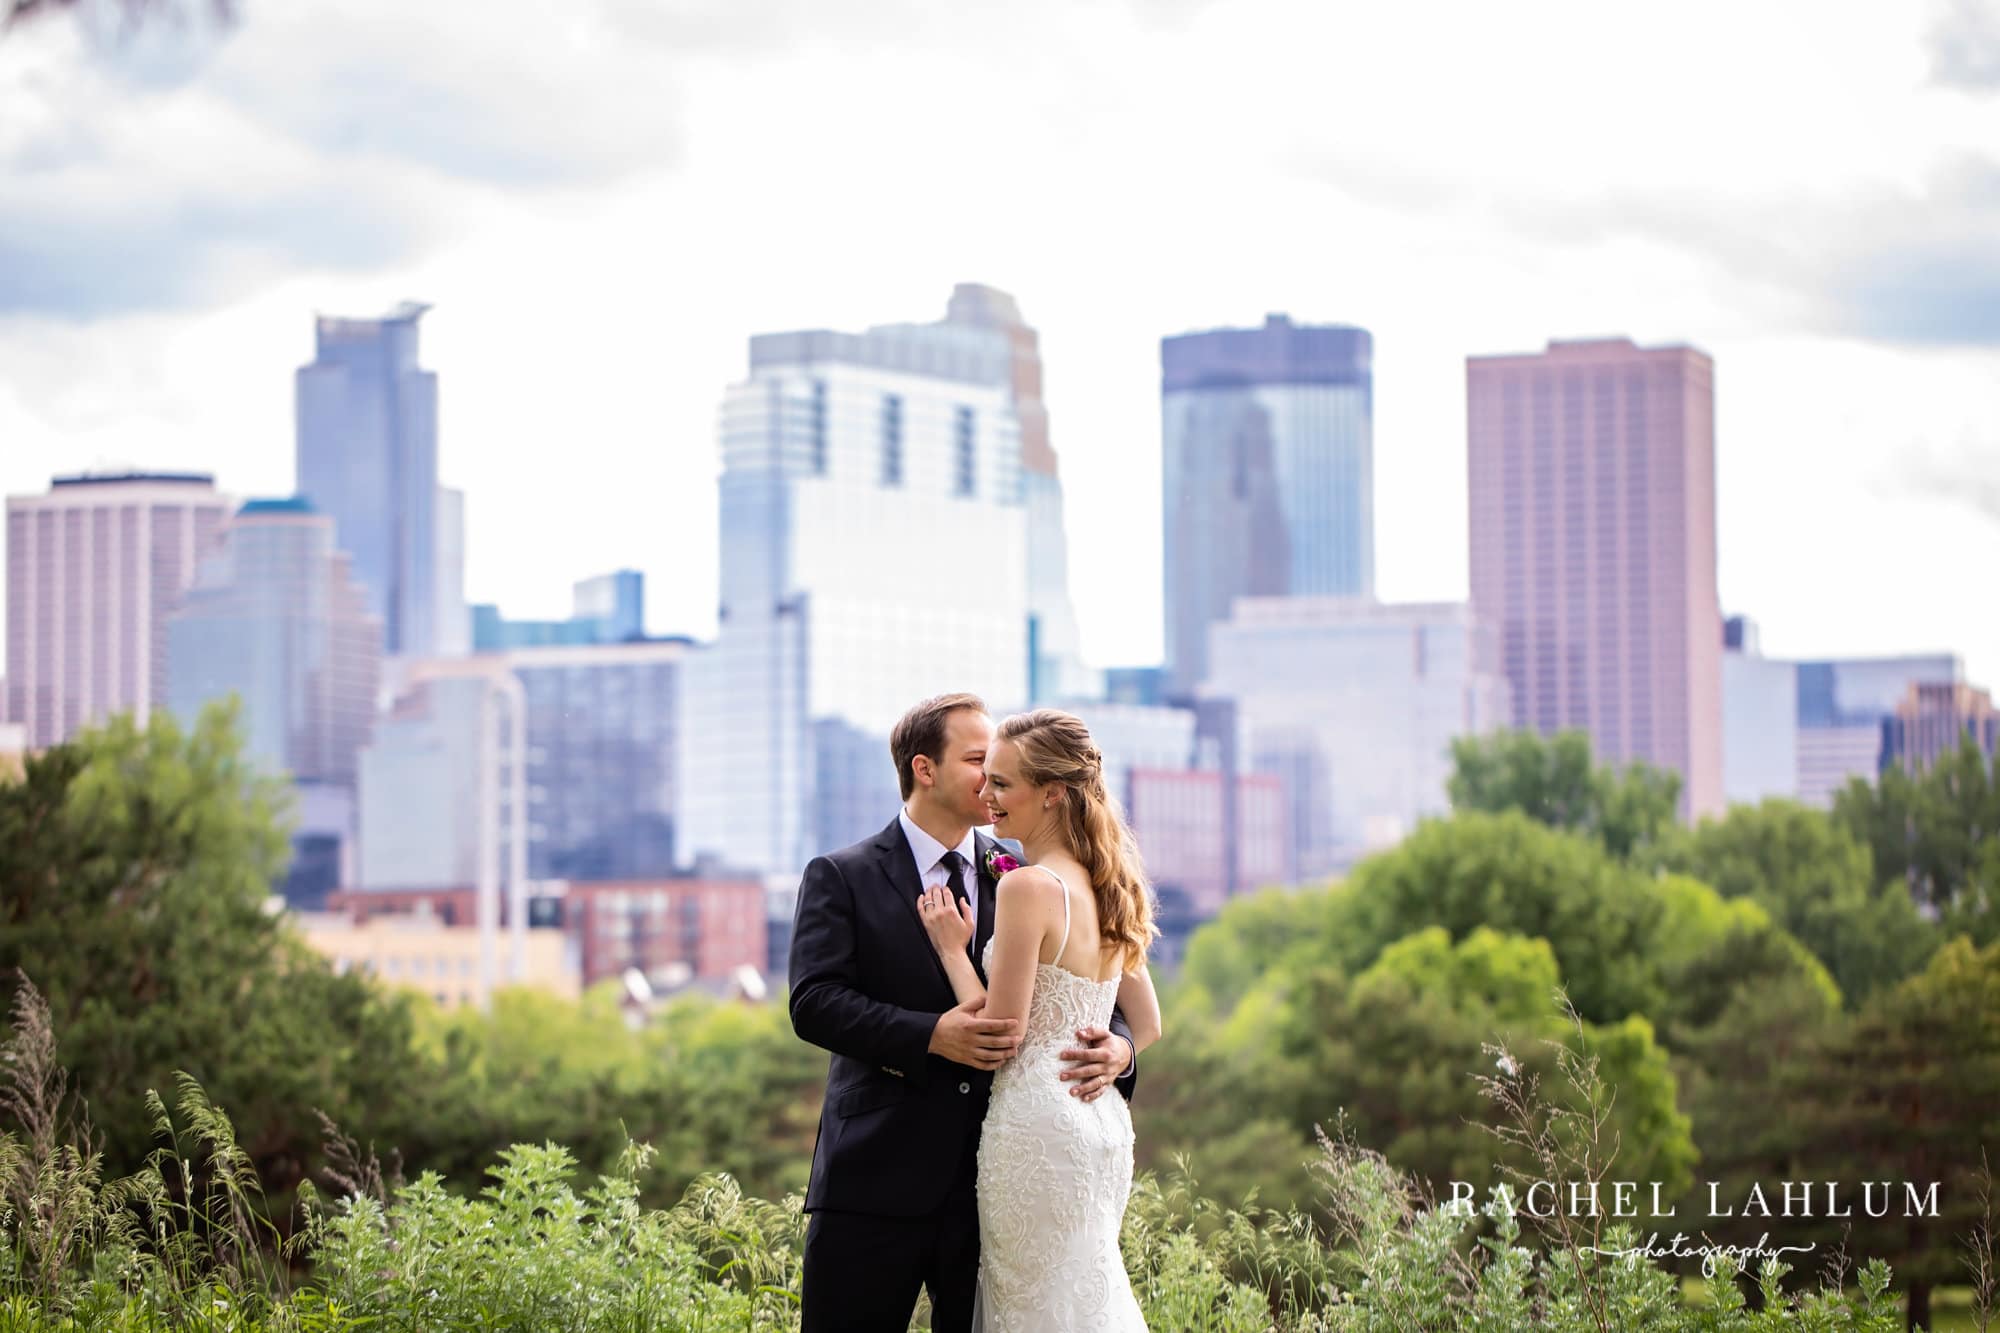 Groom kisses bride on the check in front of the Minneapolis skyline before wedding at Minneapolis Event Center. 